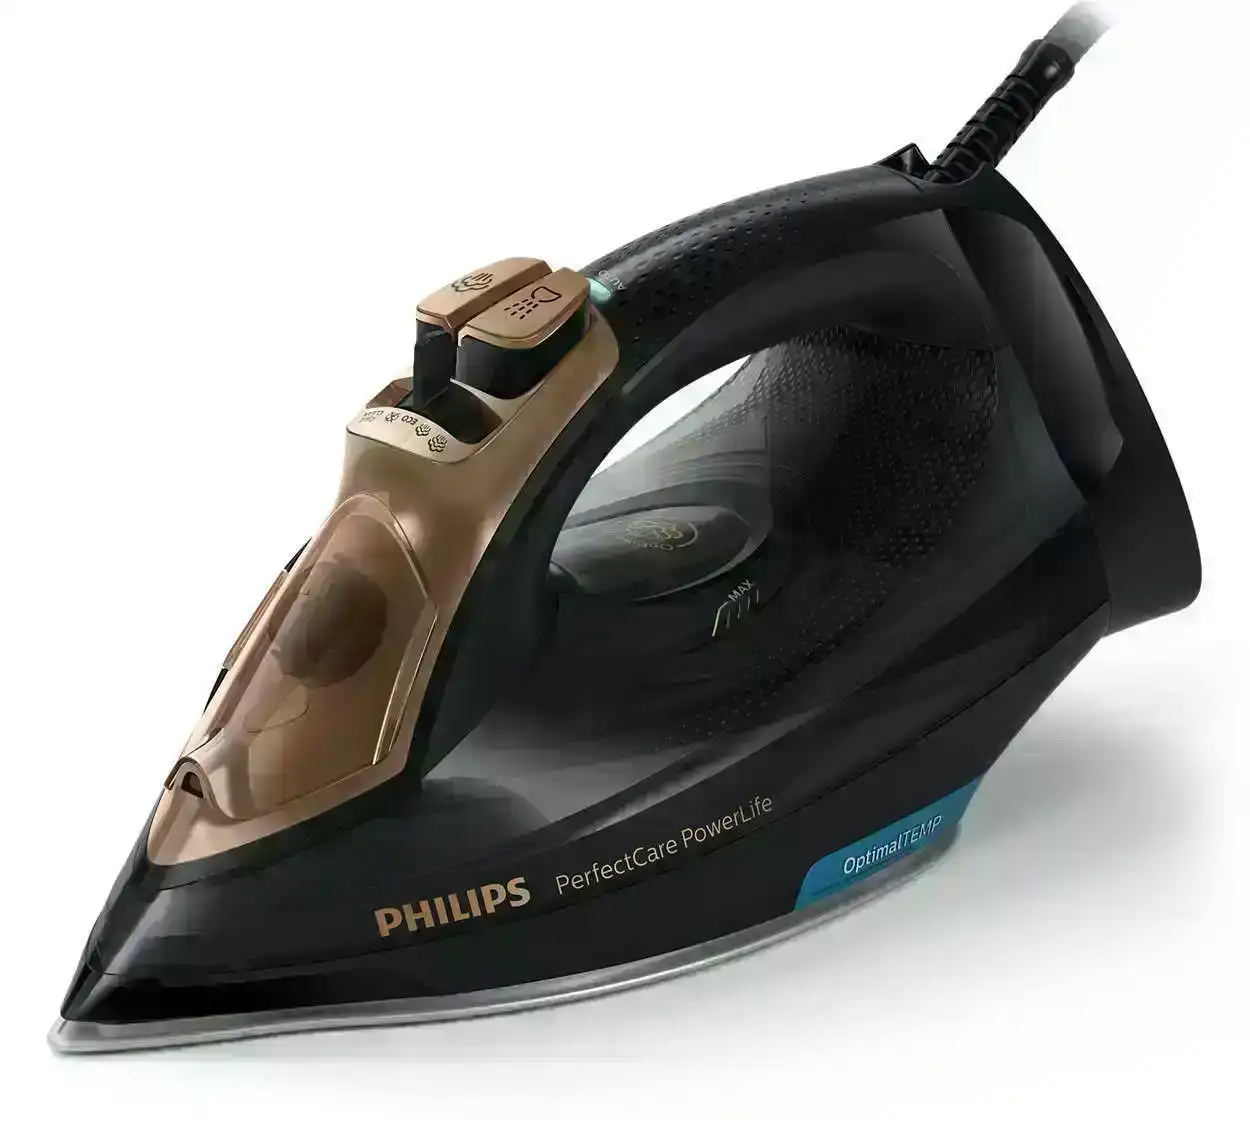 Philips GC3929/64 PerfectCare Steam Iron Clothes Garment Steamer 2400W Soleplate